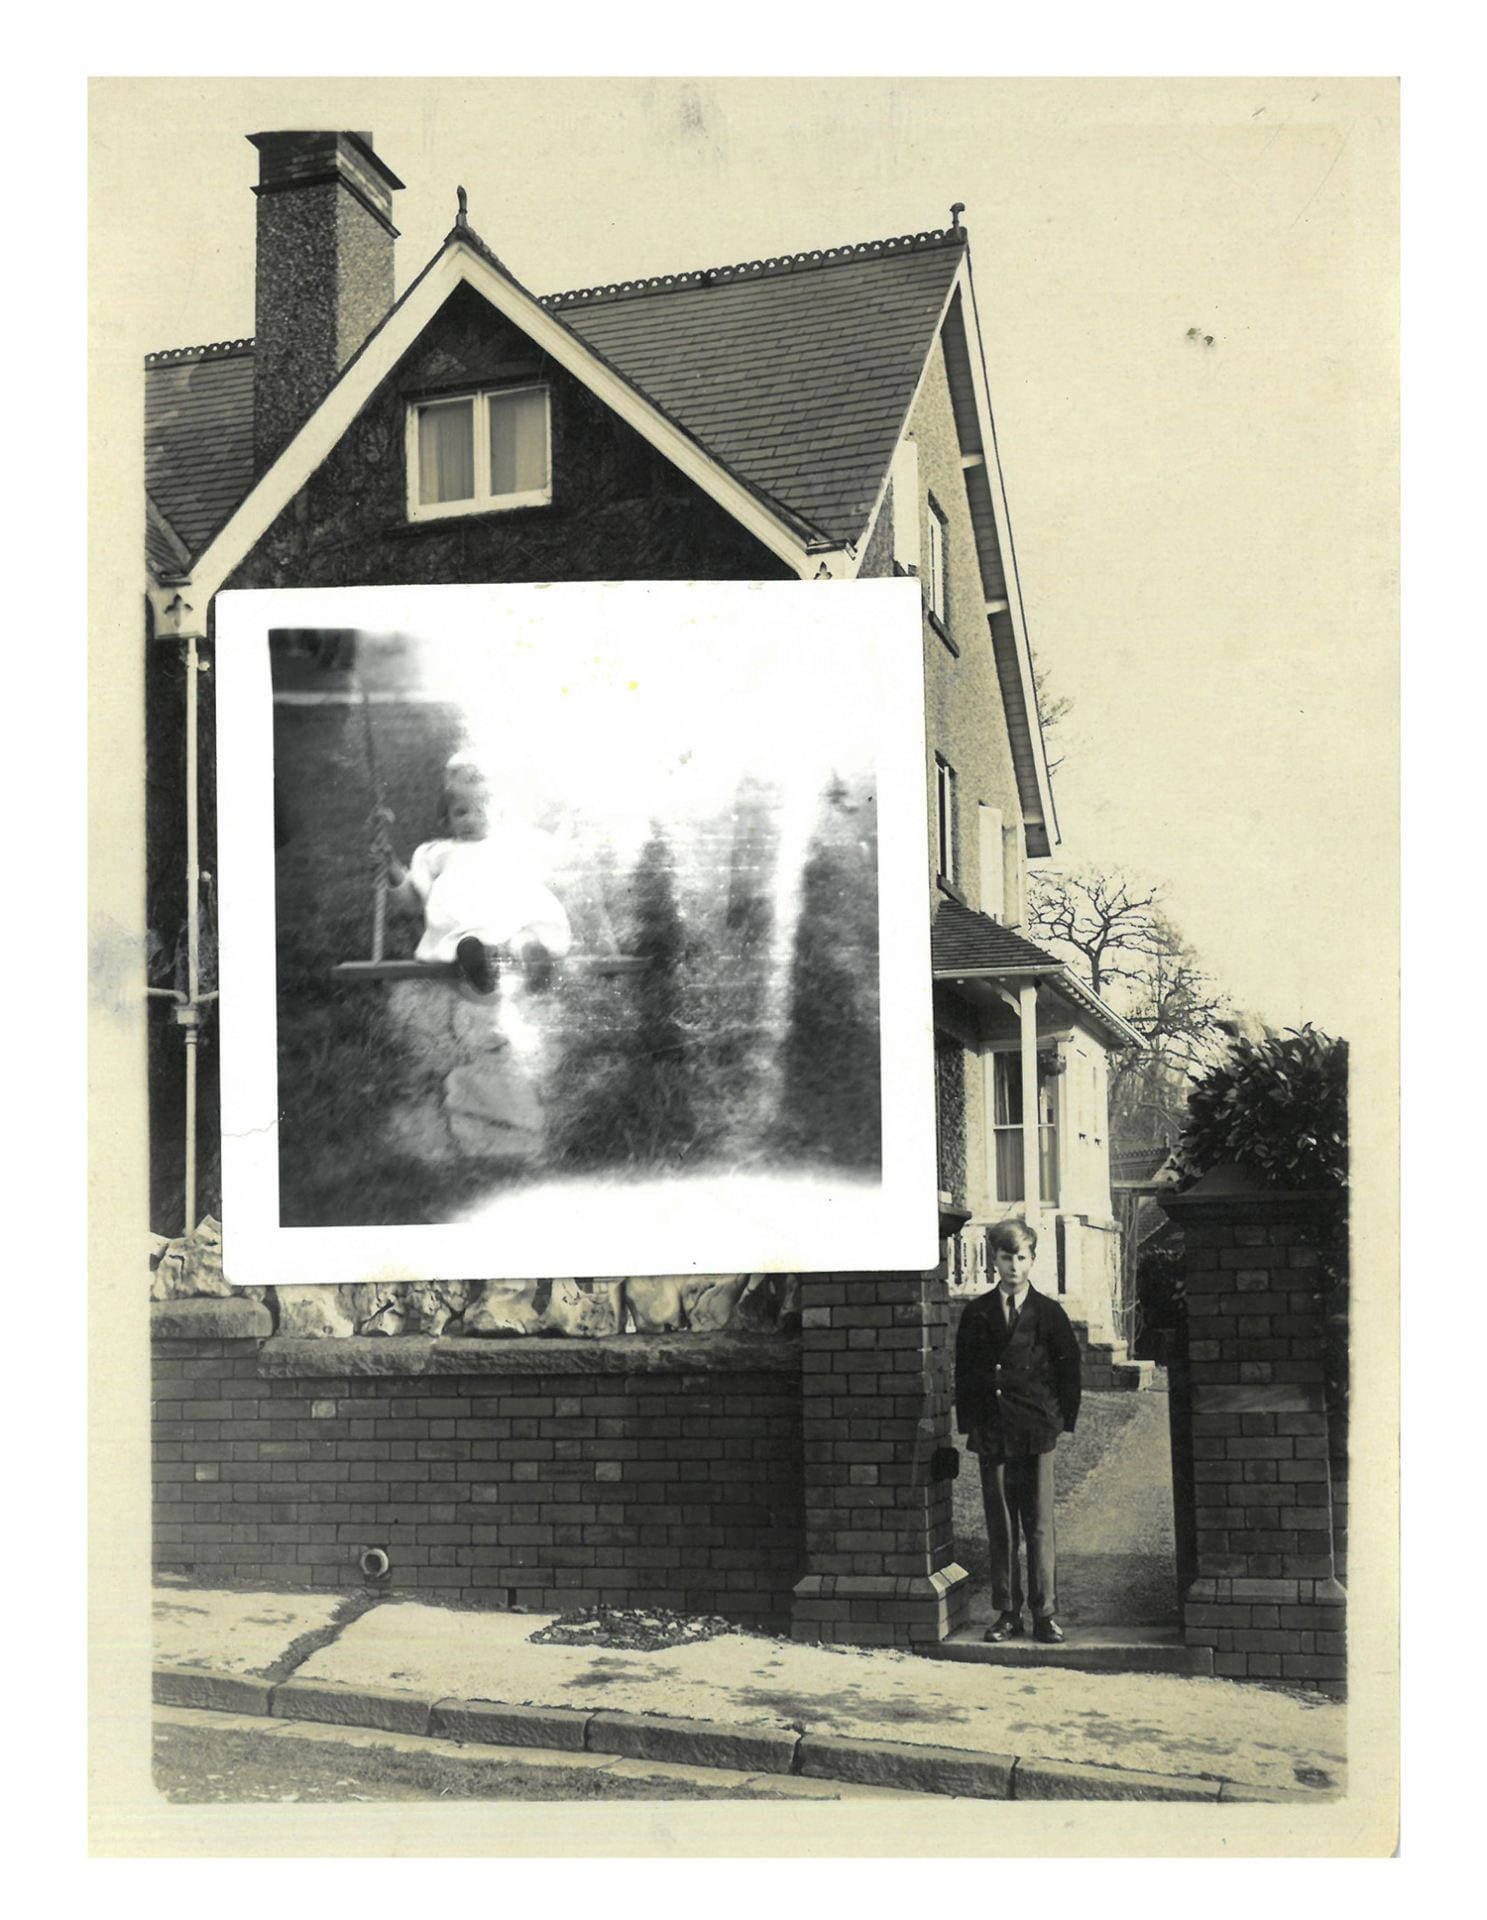 vintage image of a child on a swing overlaid on a photo of a house